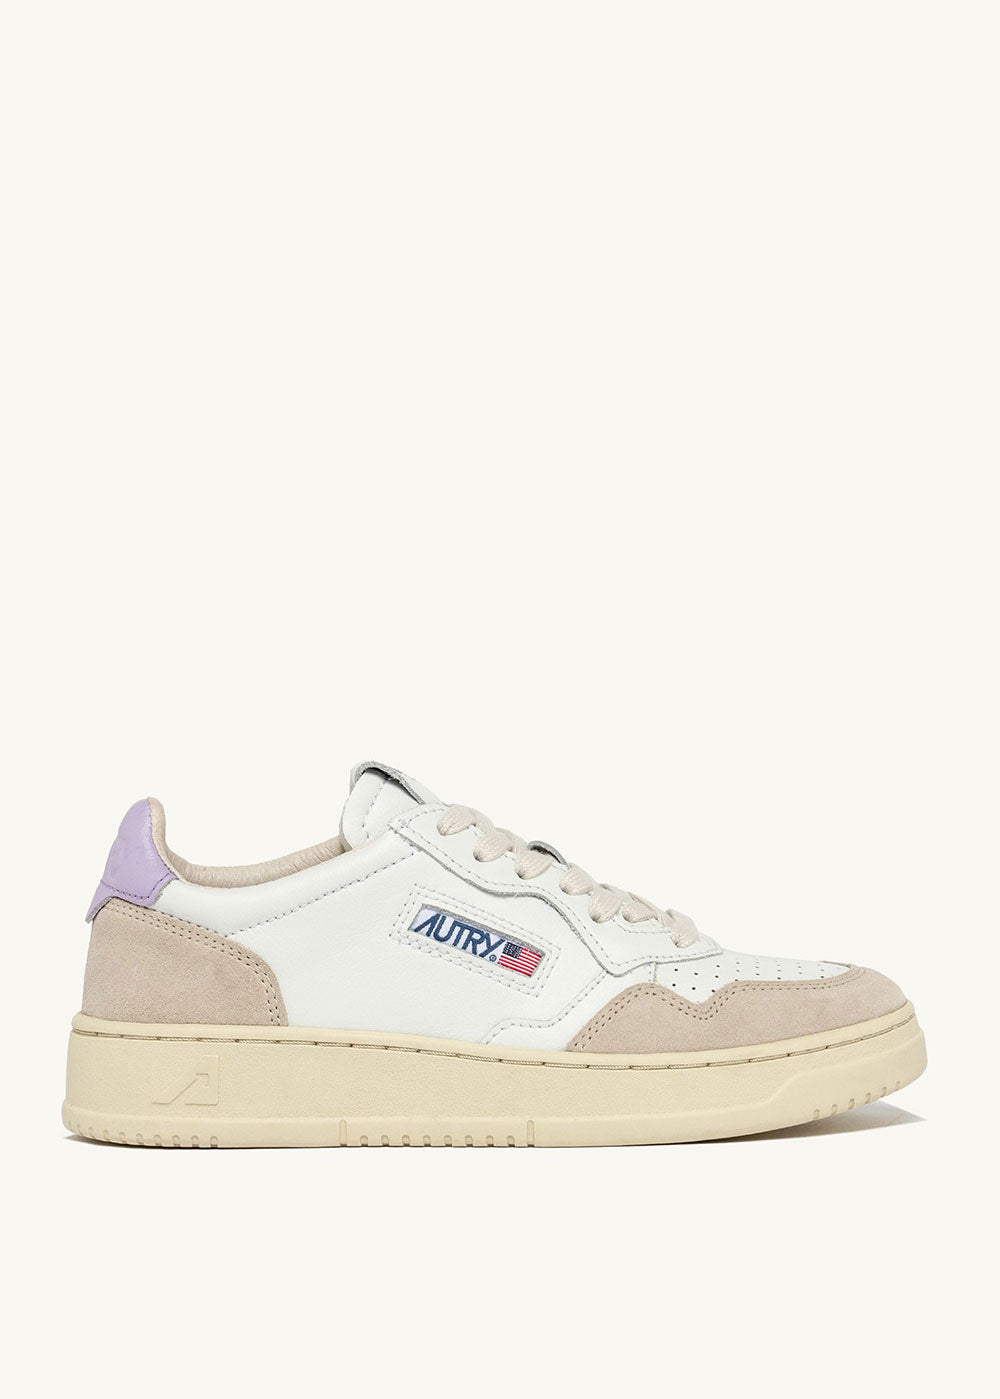 Autry Medalist Leather & Suede Sneakers - White / Lilac